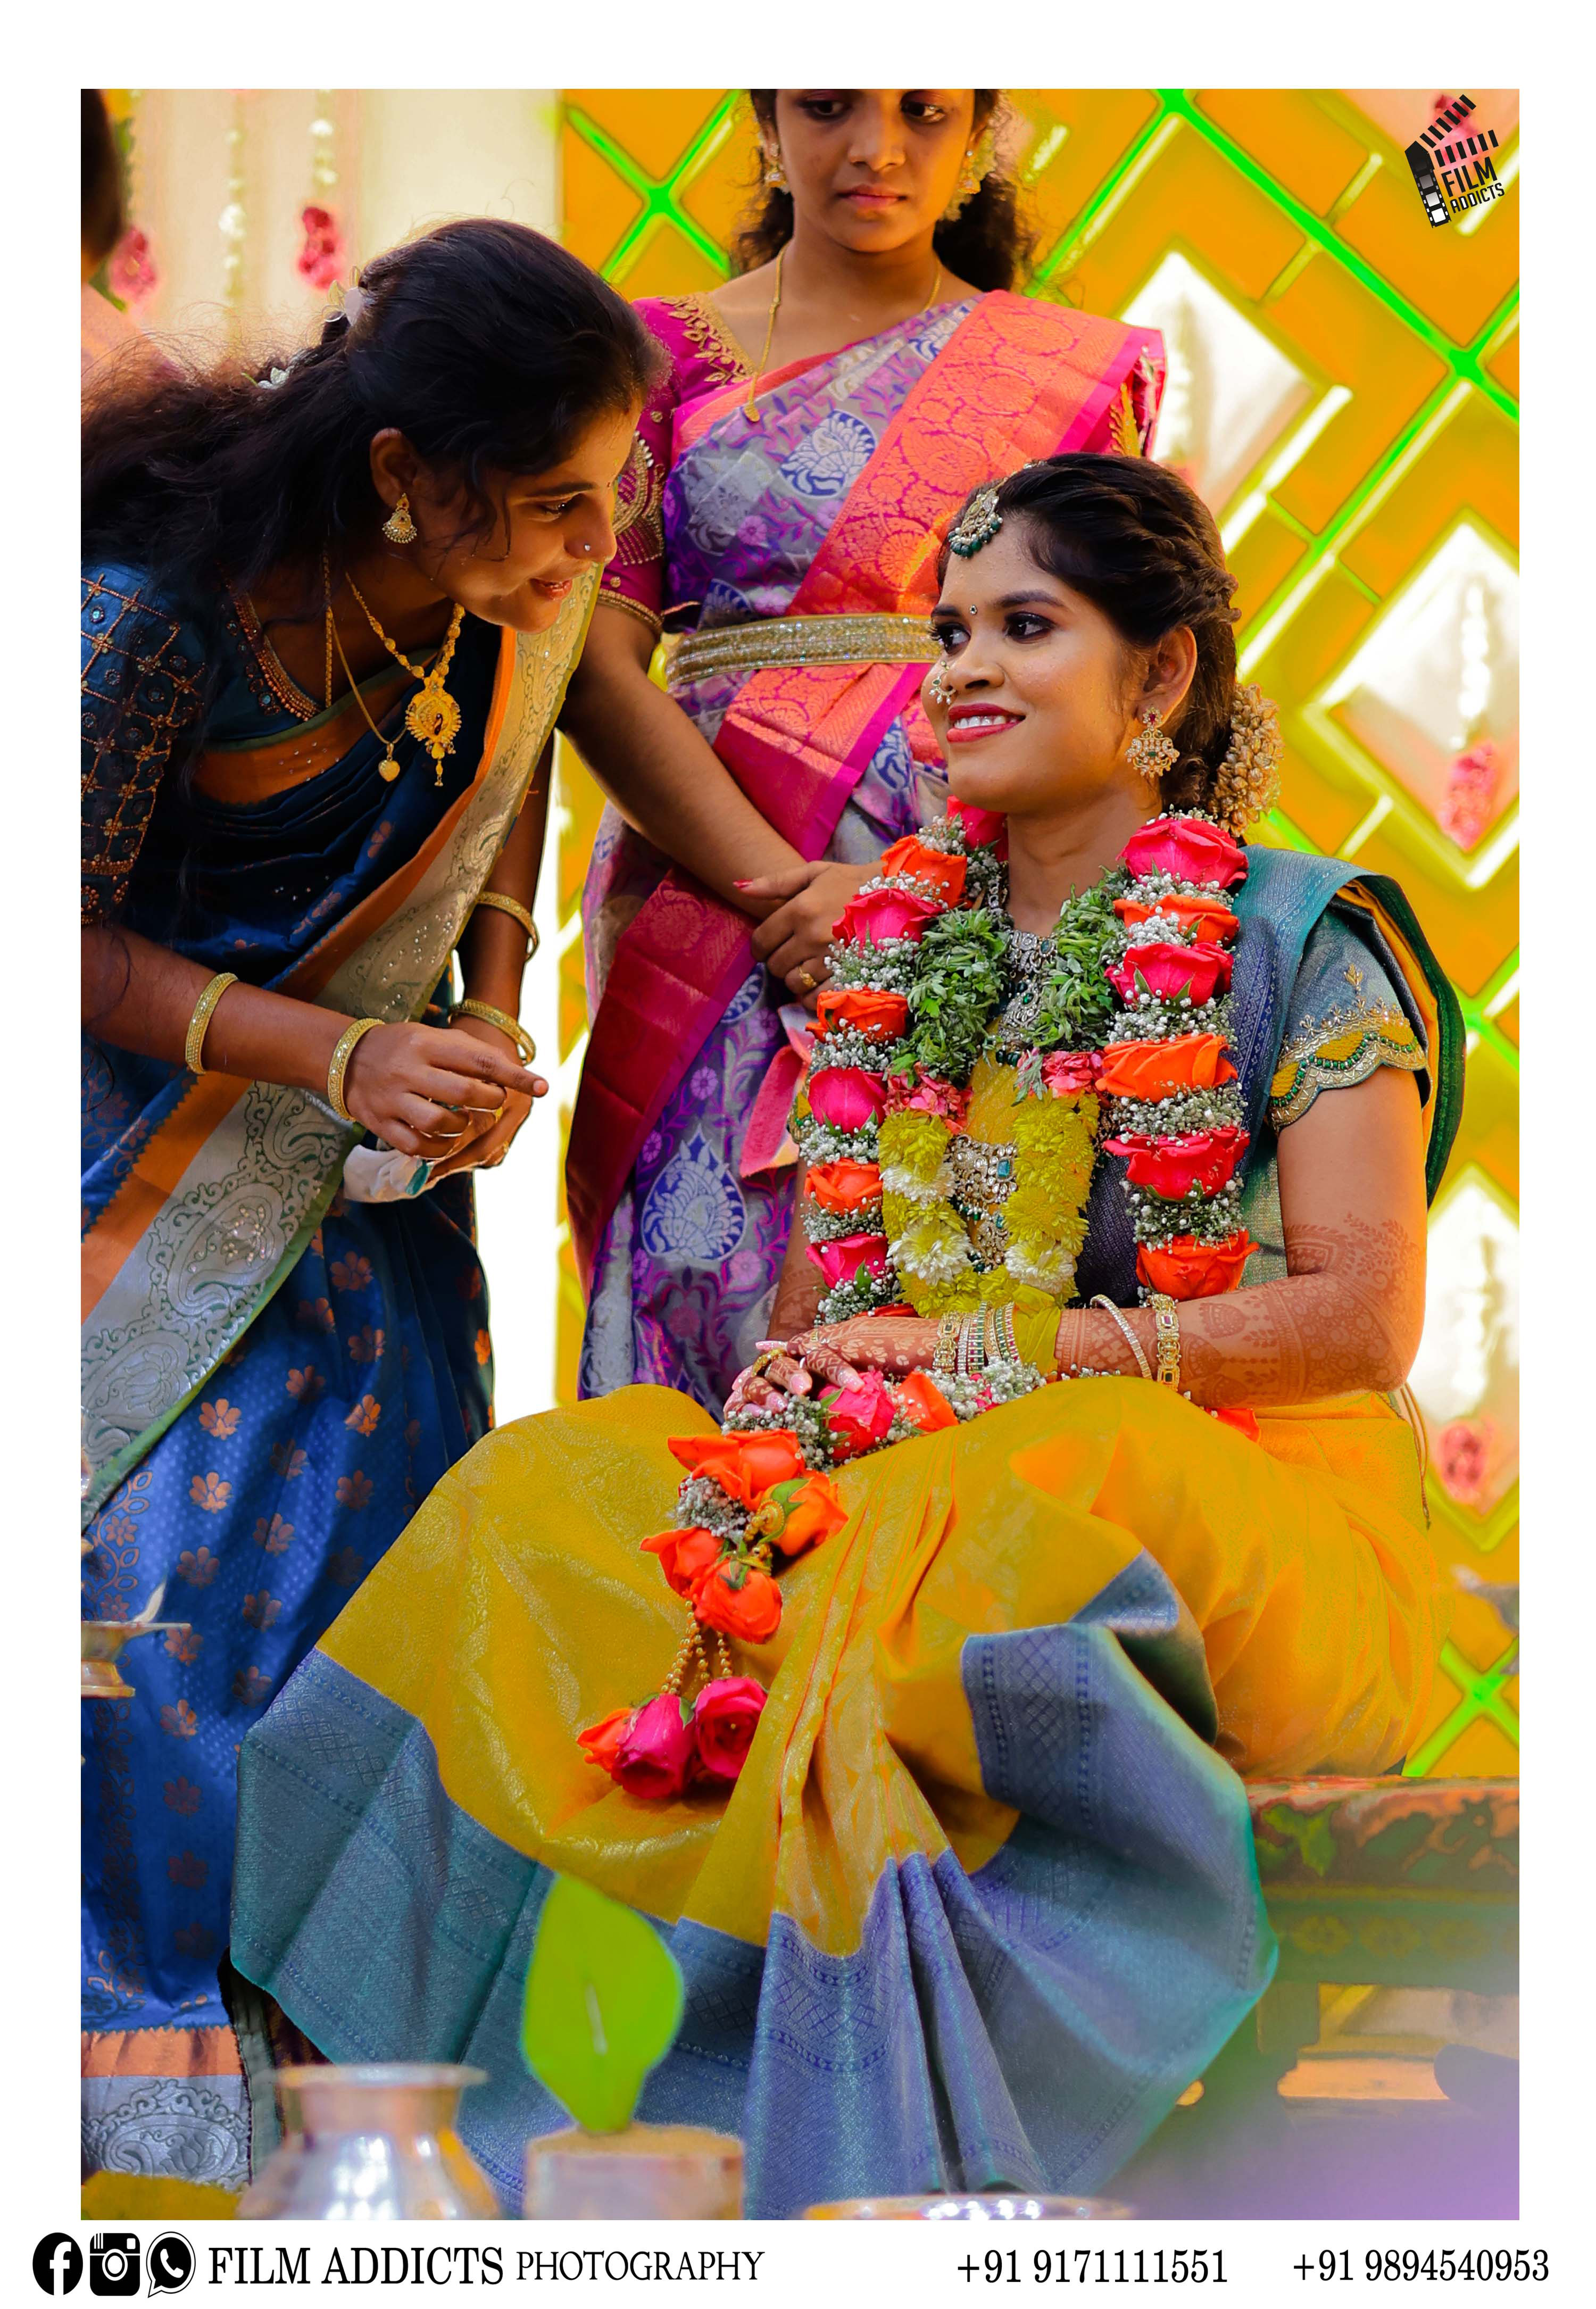 Best Wedding Planners in Karaikudi-FilmAddicts Photography,best candid photographers in Madurai ,Best Wedding Candid photographers in Madurai, Wedding Candid Moments, FilmAddicts Photography ,FilmAddictsPhotography ,best wedding in Madurai, Best Candid shoot in Madurai, Best moment ,Best wedding moments, Best wedding photography in Madurai, Best wedding videography in Madurai, Bestcoupleshoot, Best candid, Best wedding shoot, Best wedding candid, best marriage photographers in Madurai, best marriage photography in Madurai, best candid photography, best Madurai photography, Madurai ,Madurai photography ,Madurai couples ,candid shoot ,candid ,tamilnadu wedding photography, best photographers in Madurai, Best Wedding Photographers in Madurai,  Wedding Candid Moments FilmAddicts Photography, FilmAddicts Photographers,  Best Candid shooting Madurai, bestmoment , Best Wedding moments , Best wedding photography in Madurai, Best wedding videography in Madurai, Best couple shoot, Best candid, Best wedding shoot ,Best wedding candid, best marriage photographers in Madurai, best marriage photography in Madurai, best candid photography, best Madurai photography ,Madurai photography , Madurai couples, candid shoot, candid, tamilnadu wedding photography, best photographers in Madurai, Tamilnadu